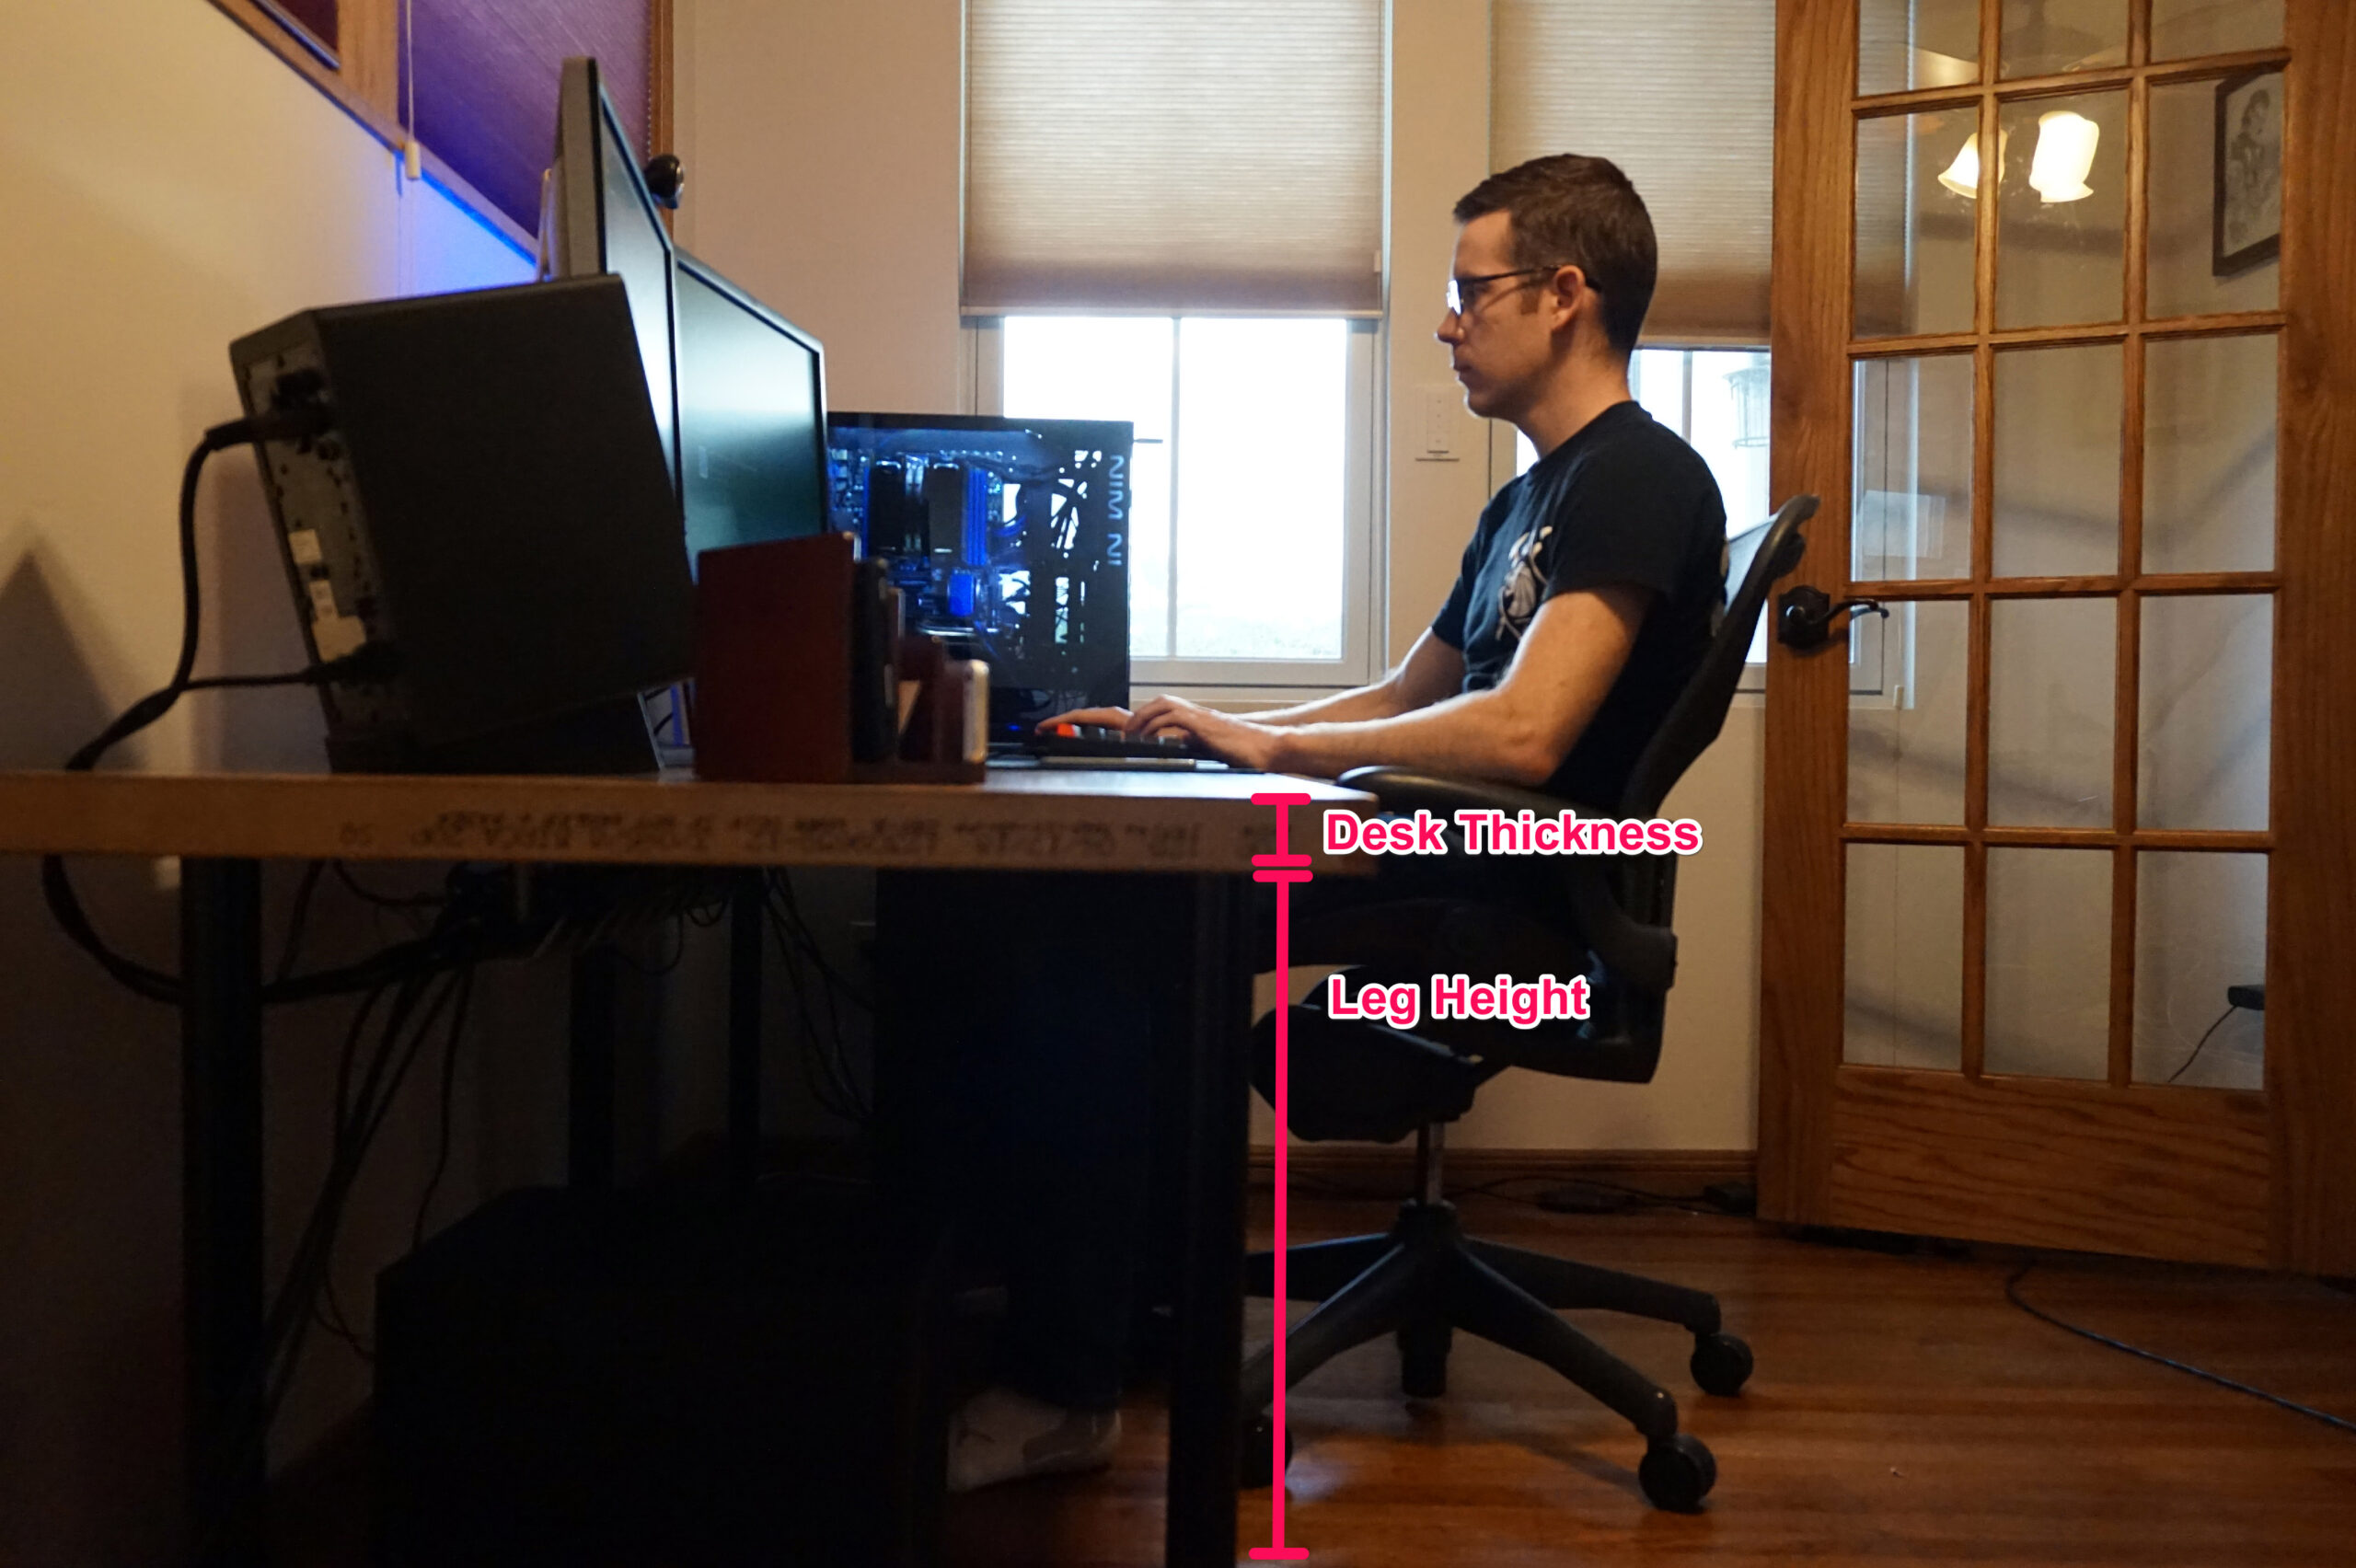 A man sitting at a DIY computer desk, with a small diagram showing how to visualize the desk thickness and height for better ergonomics.